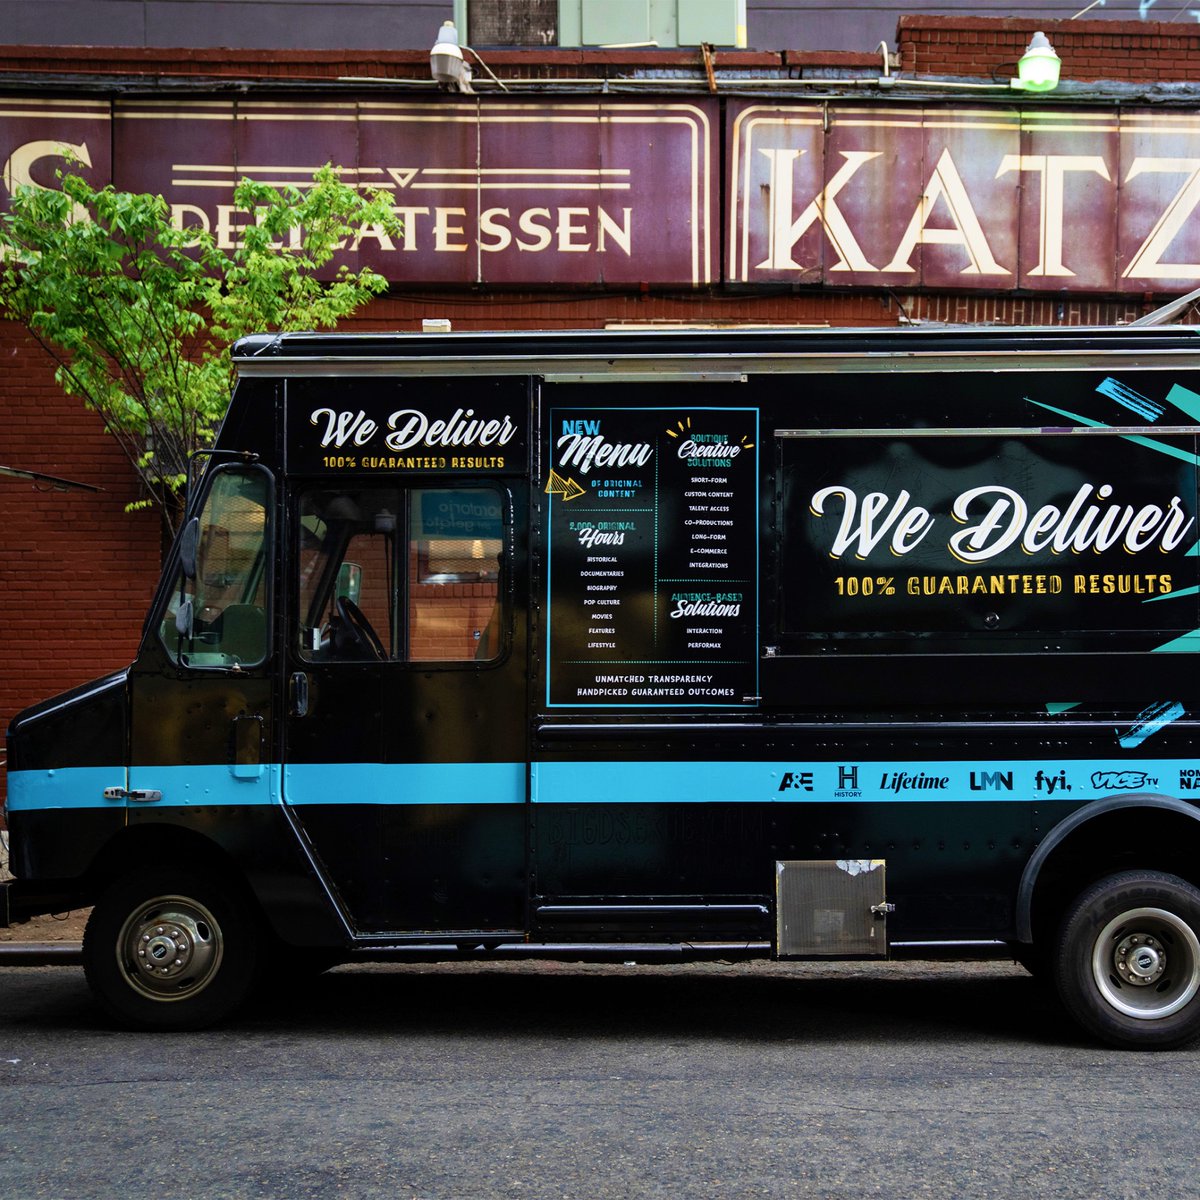 To kick off Upfront season, our Ad Sales team served up @KatzsDeli to all its partner agencies and brand teams via mailers and food trucks. We reached over 1,500 clients during this key sales period and earned World Central Kitchen over $13k in meal donations.